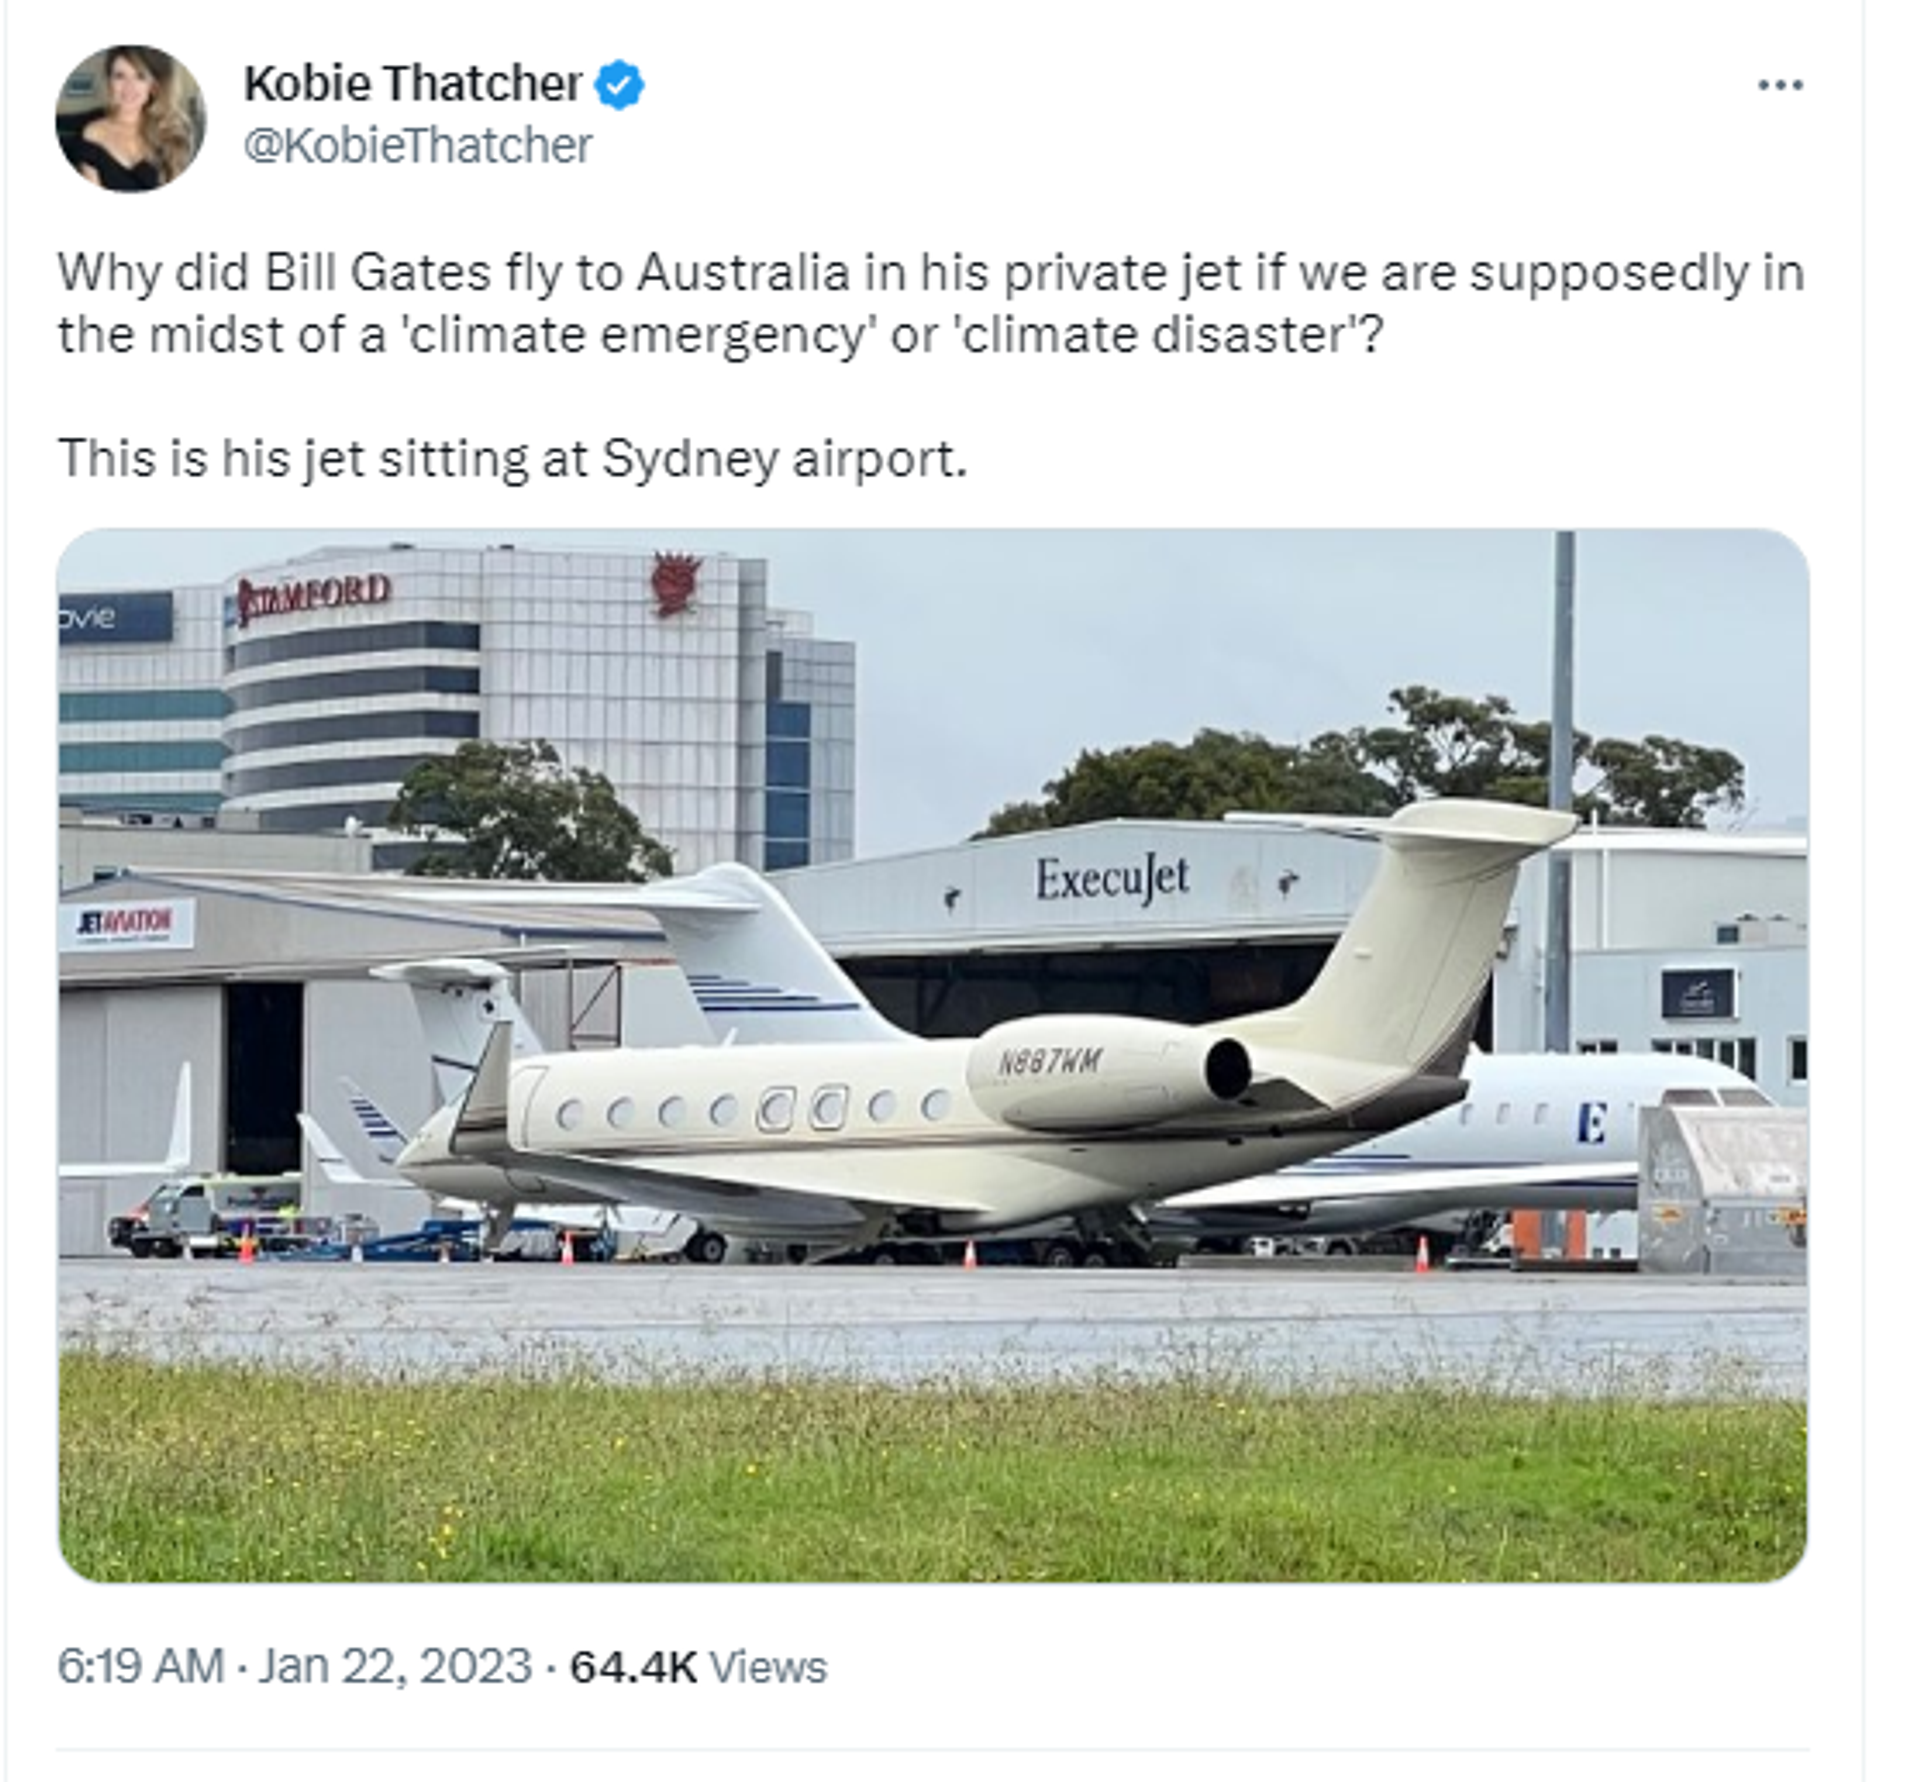 Twitter screenshot purportedly showing jet owned by Bill Gates at at Sydney airport. - Sputnik International, 1920, 23.02.2023